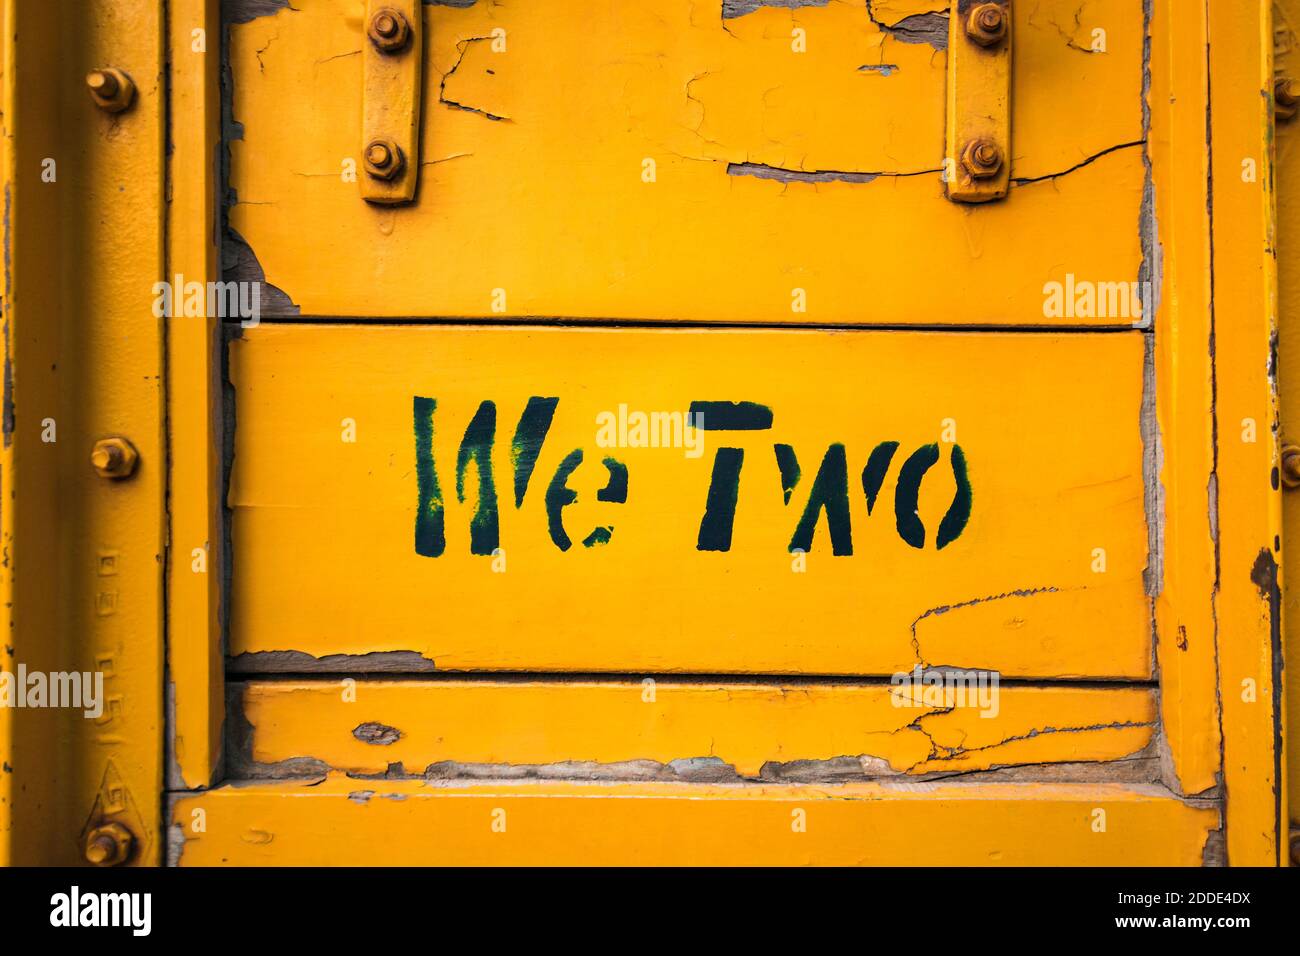 Short phrase on side of yellow weathered truck Stock Photo